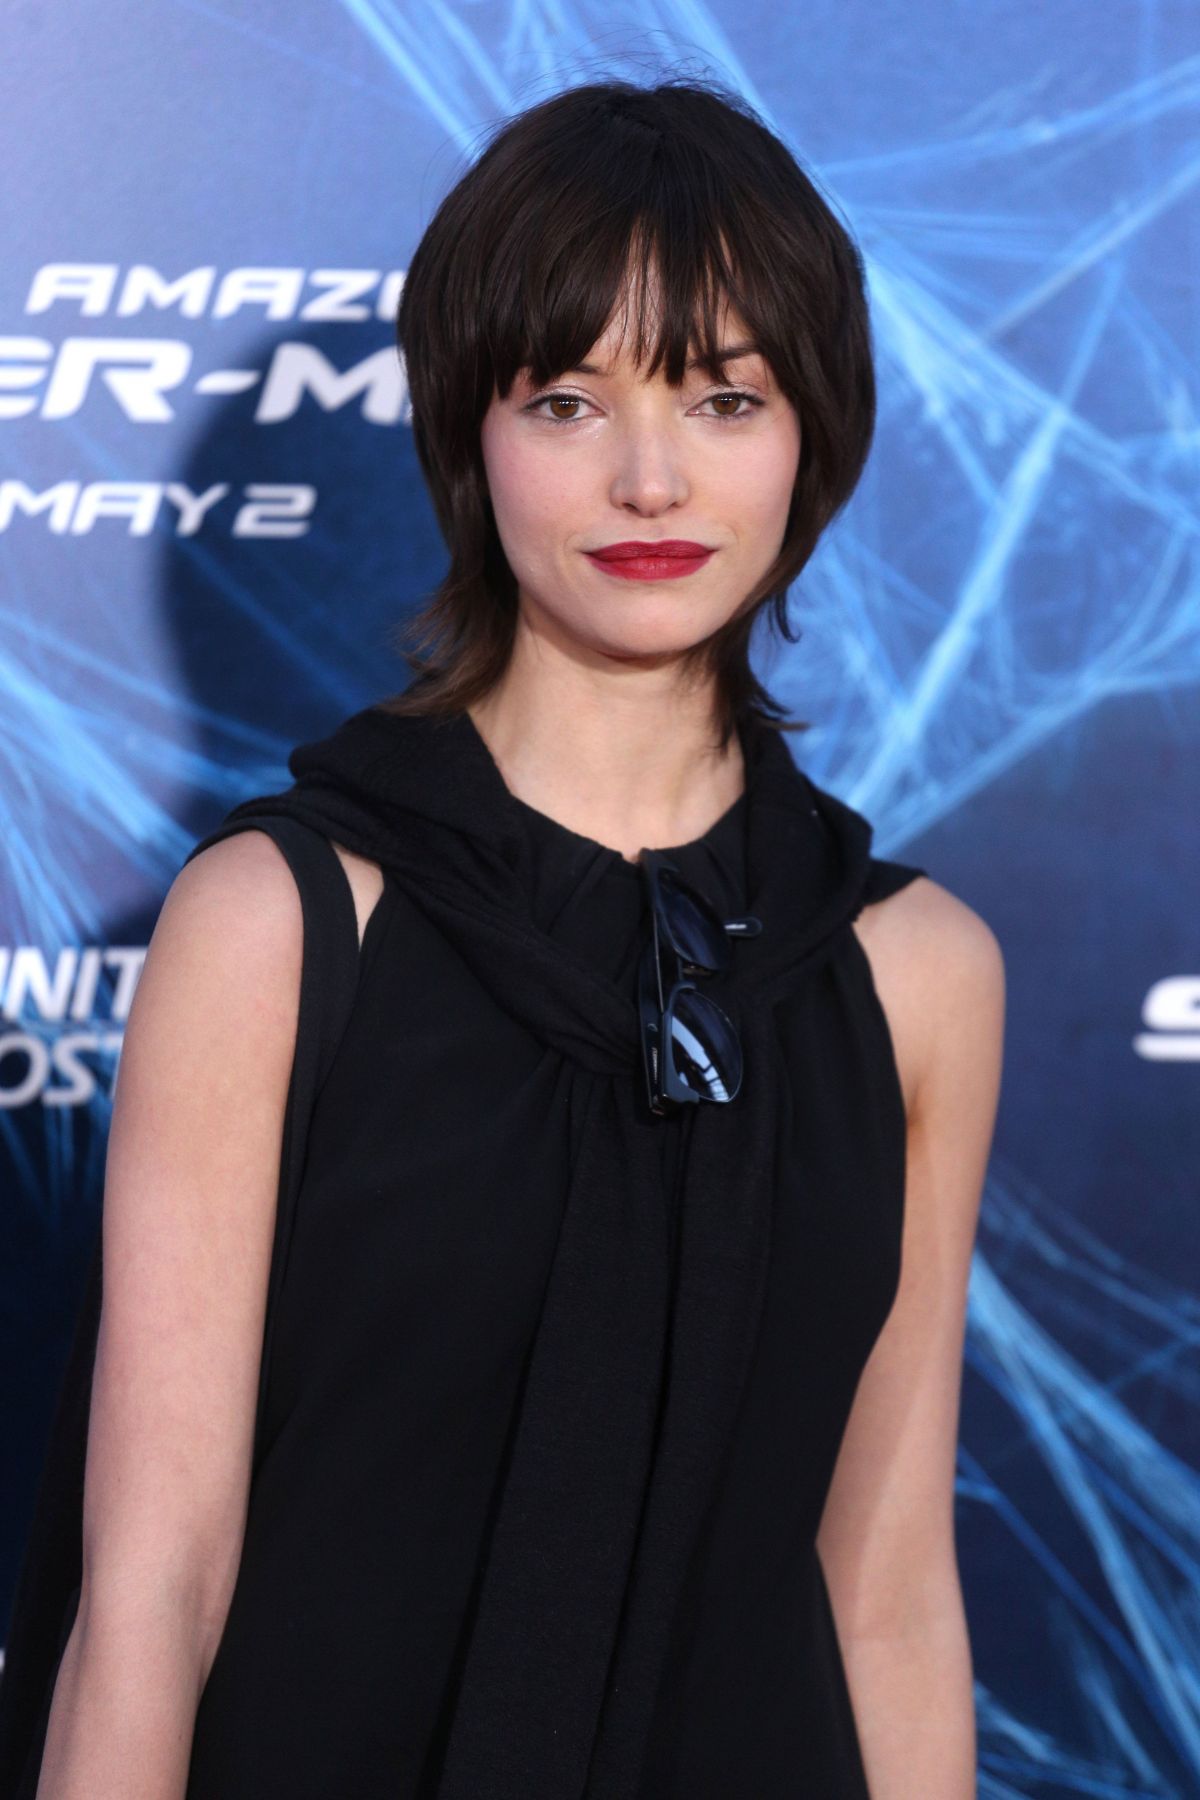 JULIA MORRISON at The Amazing Spider-man 2 Premiere in New York